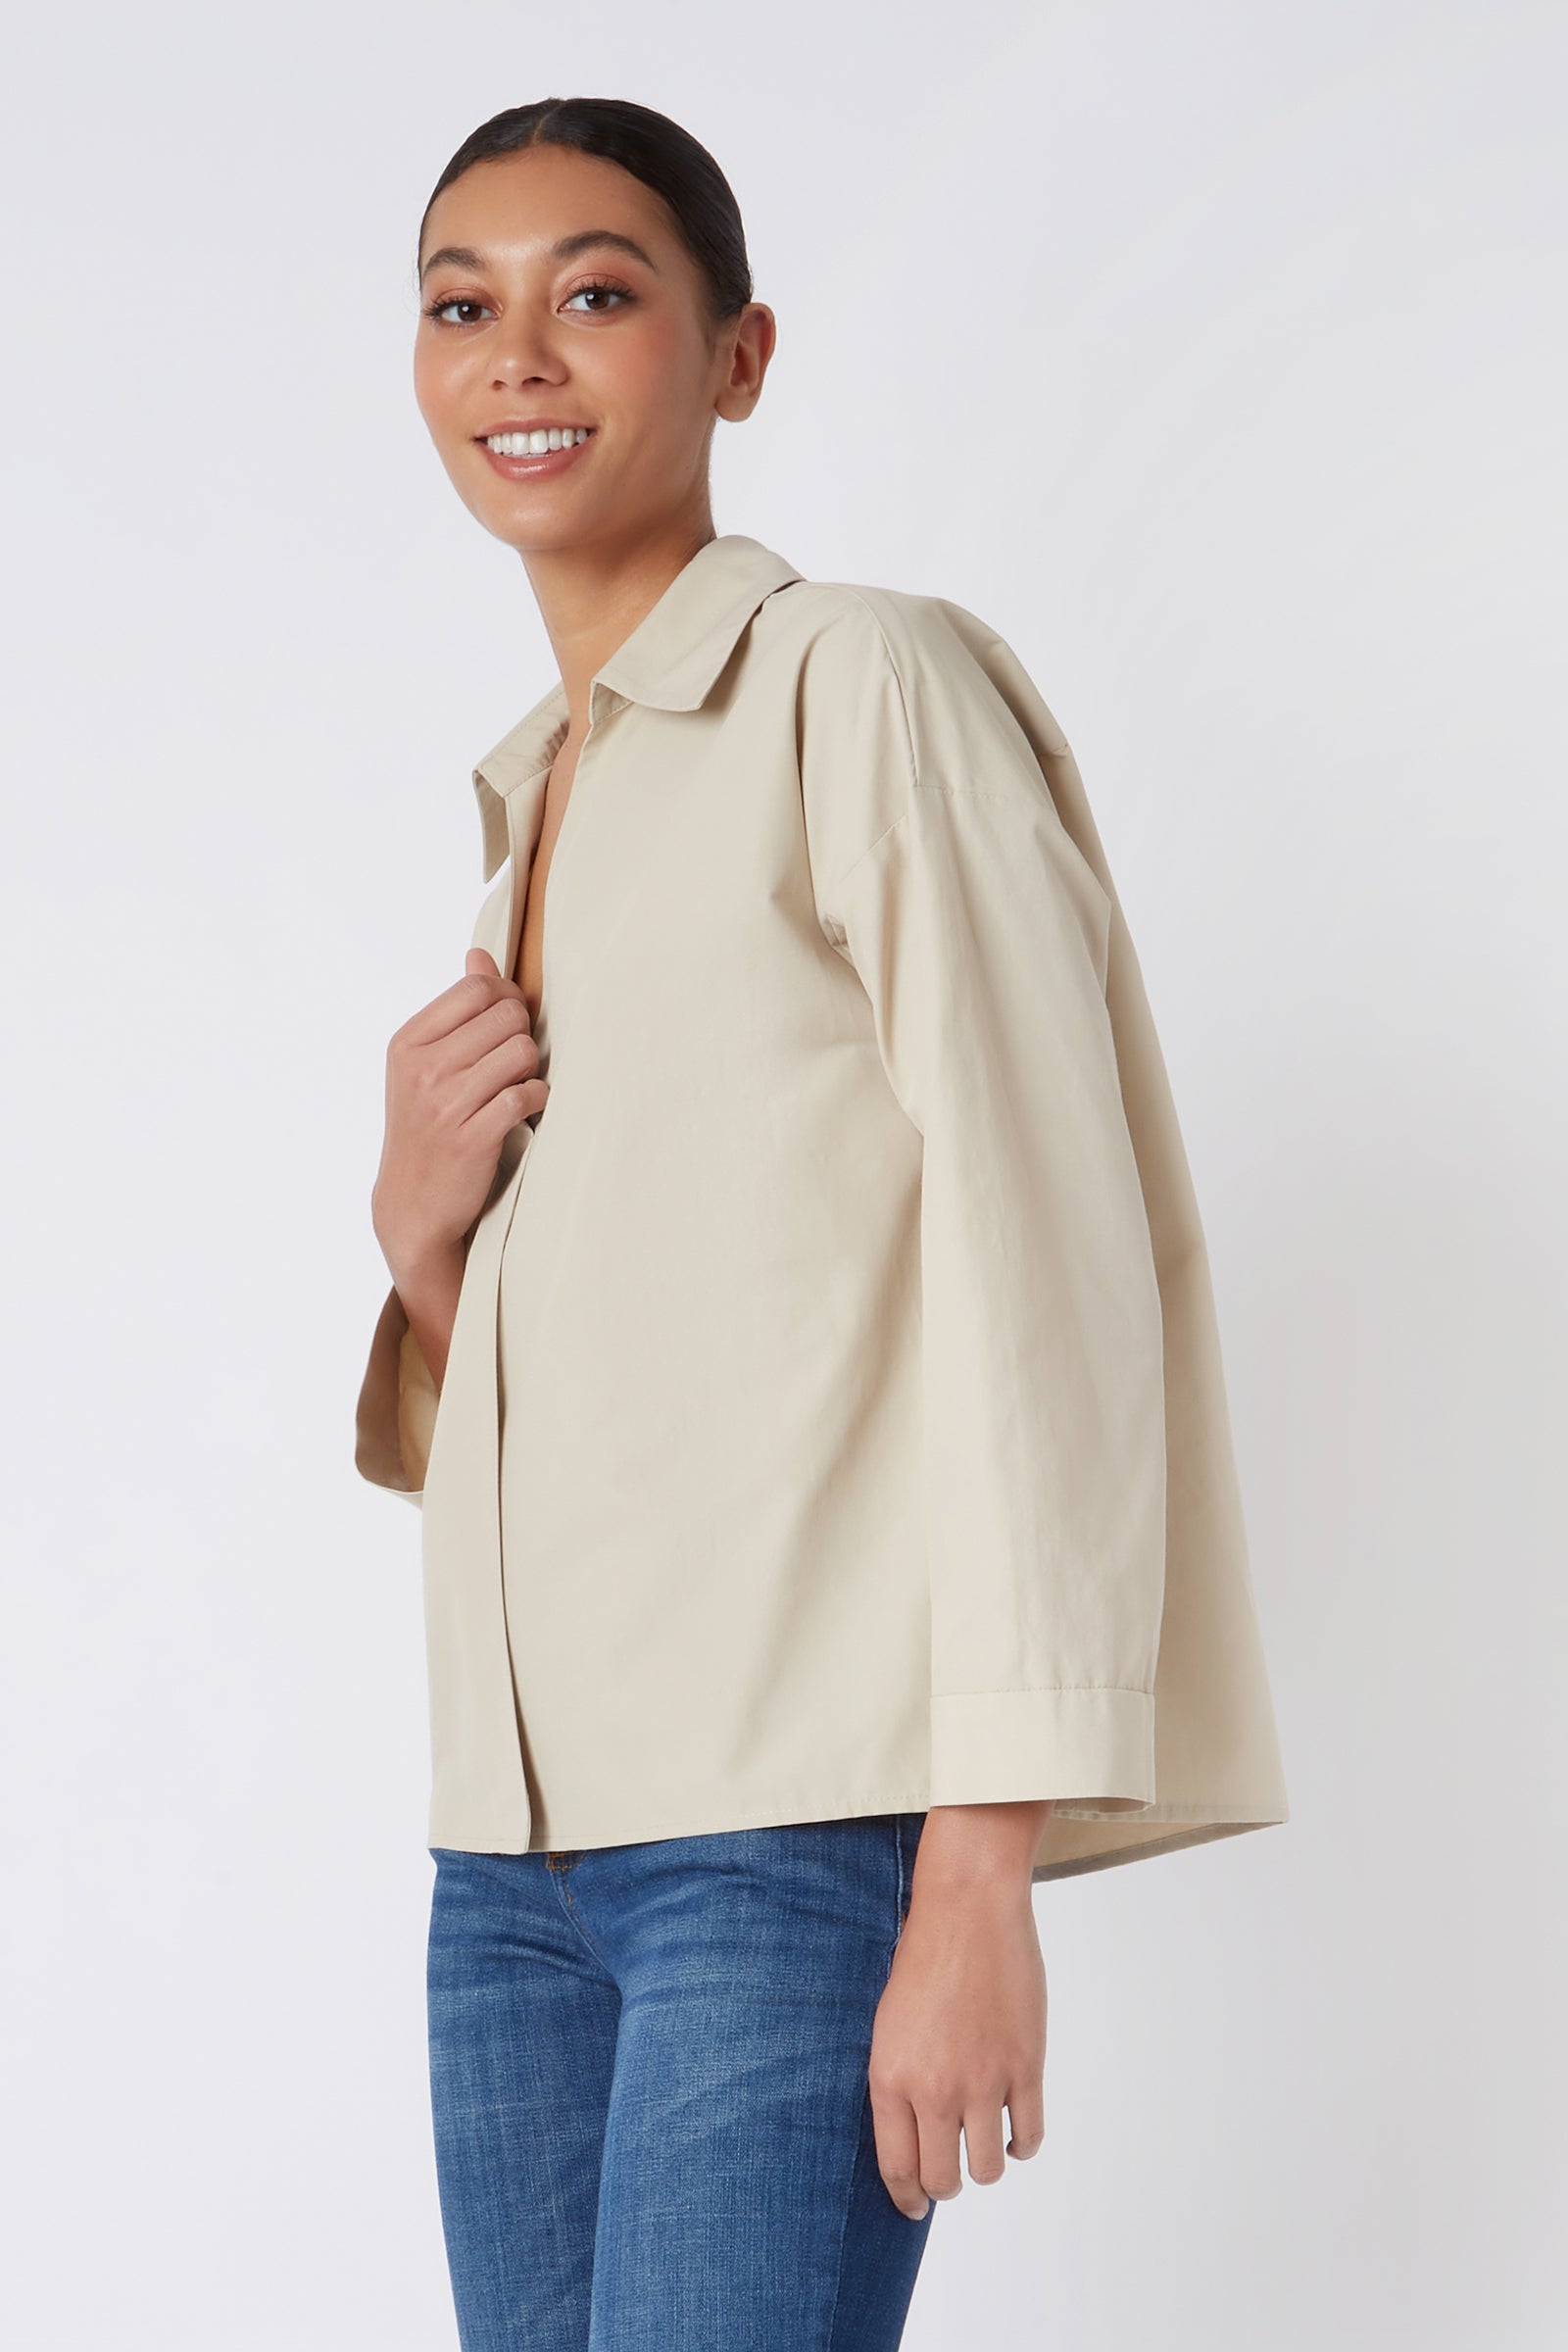 Kal Rieman Emma Collared Kimono Top in Khaki on Model Cropped Front Side View